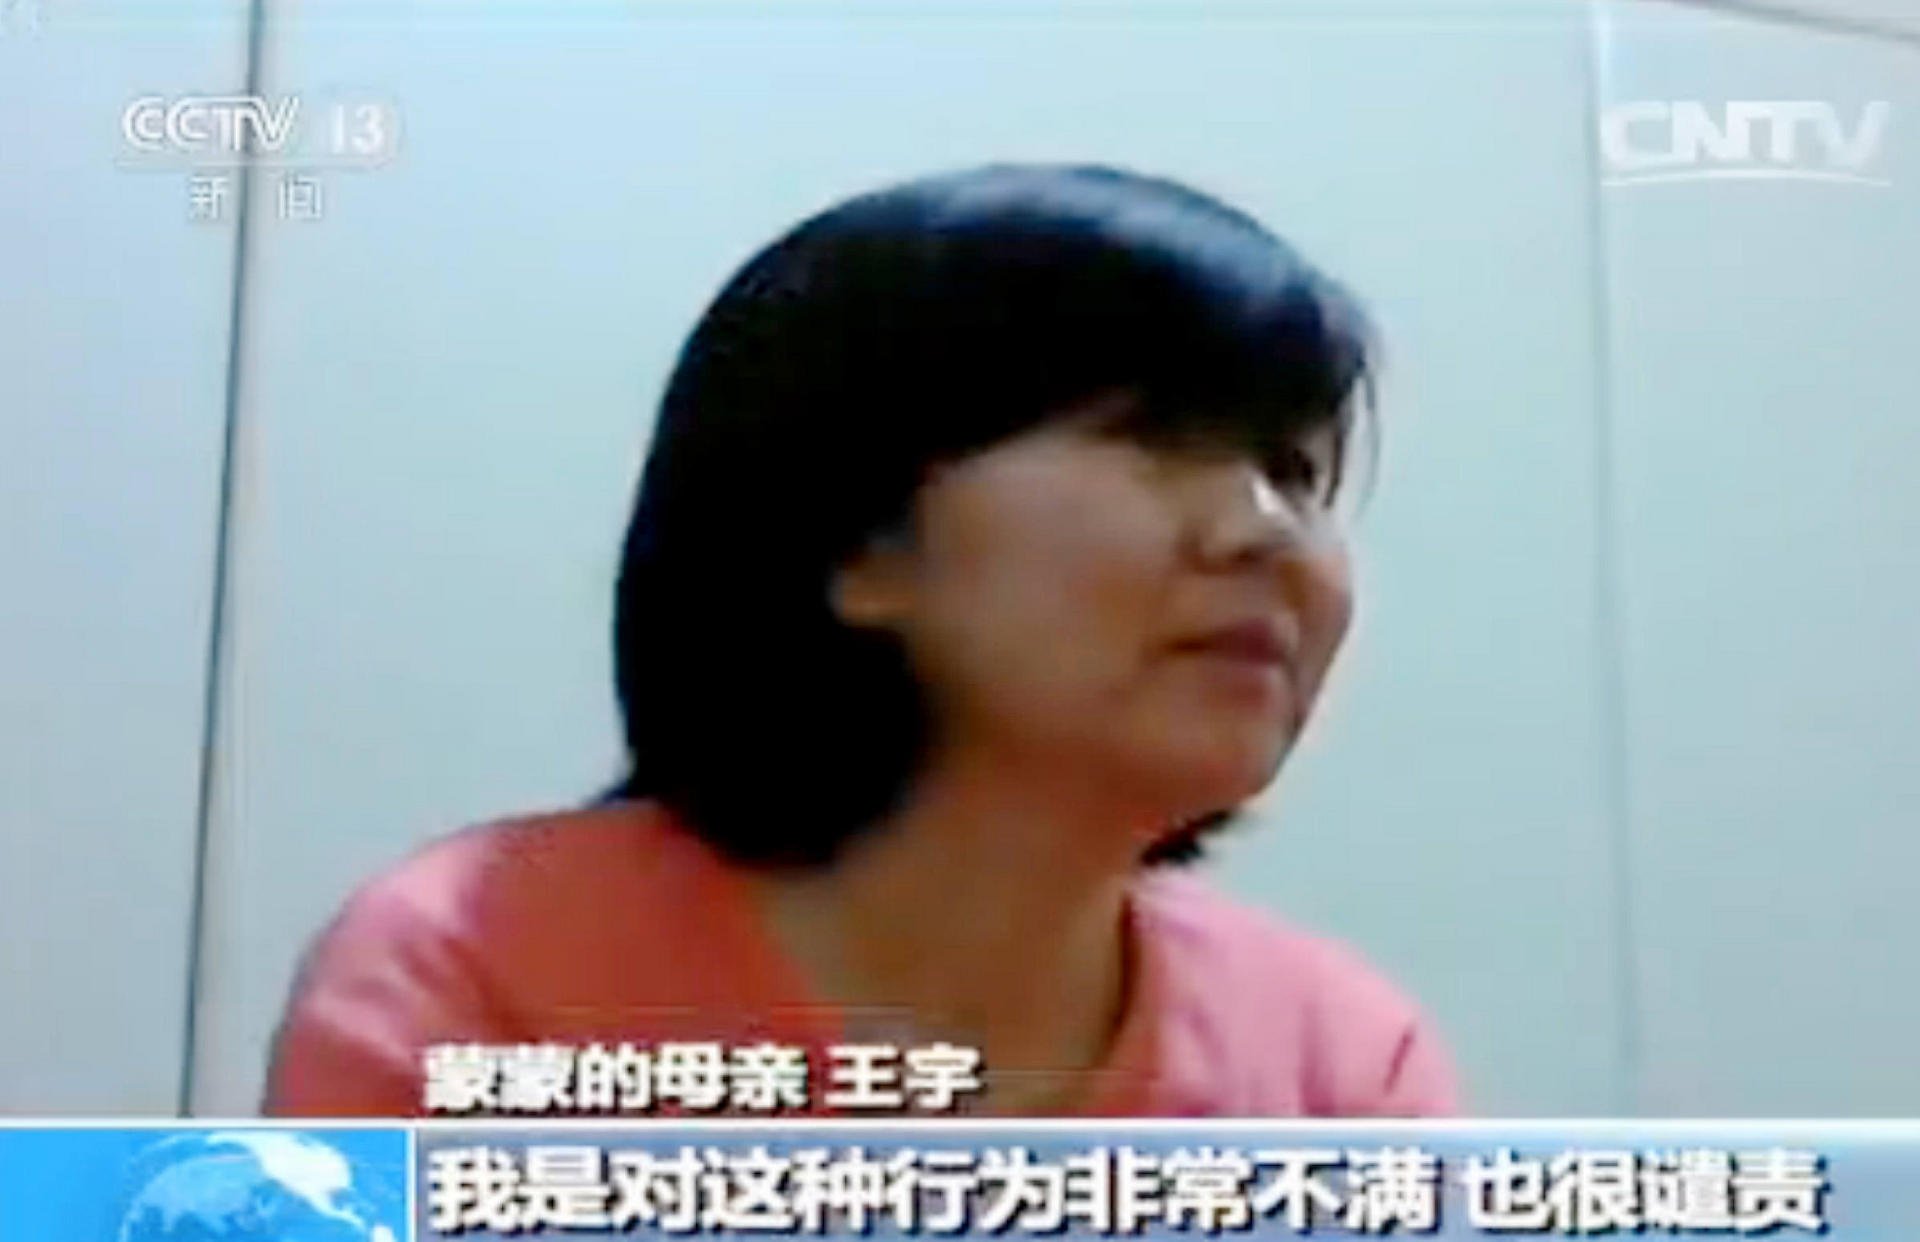 Human rights lawyer Wang Yu was detained in July in a crackdown against civil rights activists.